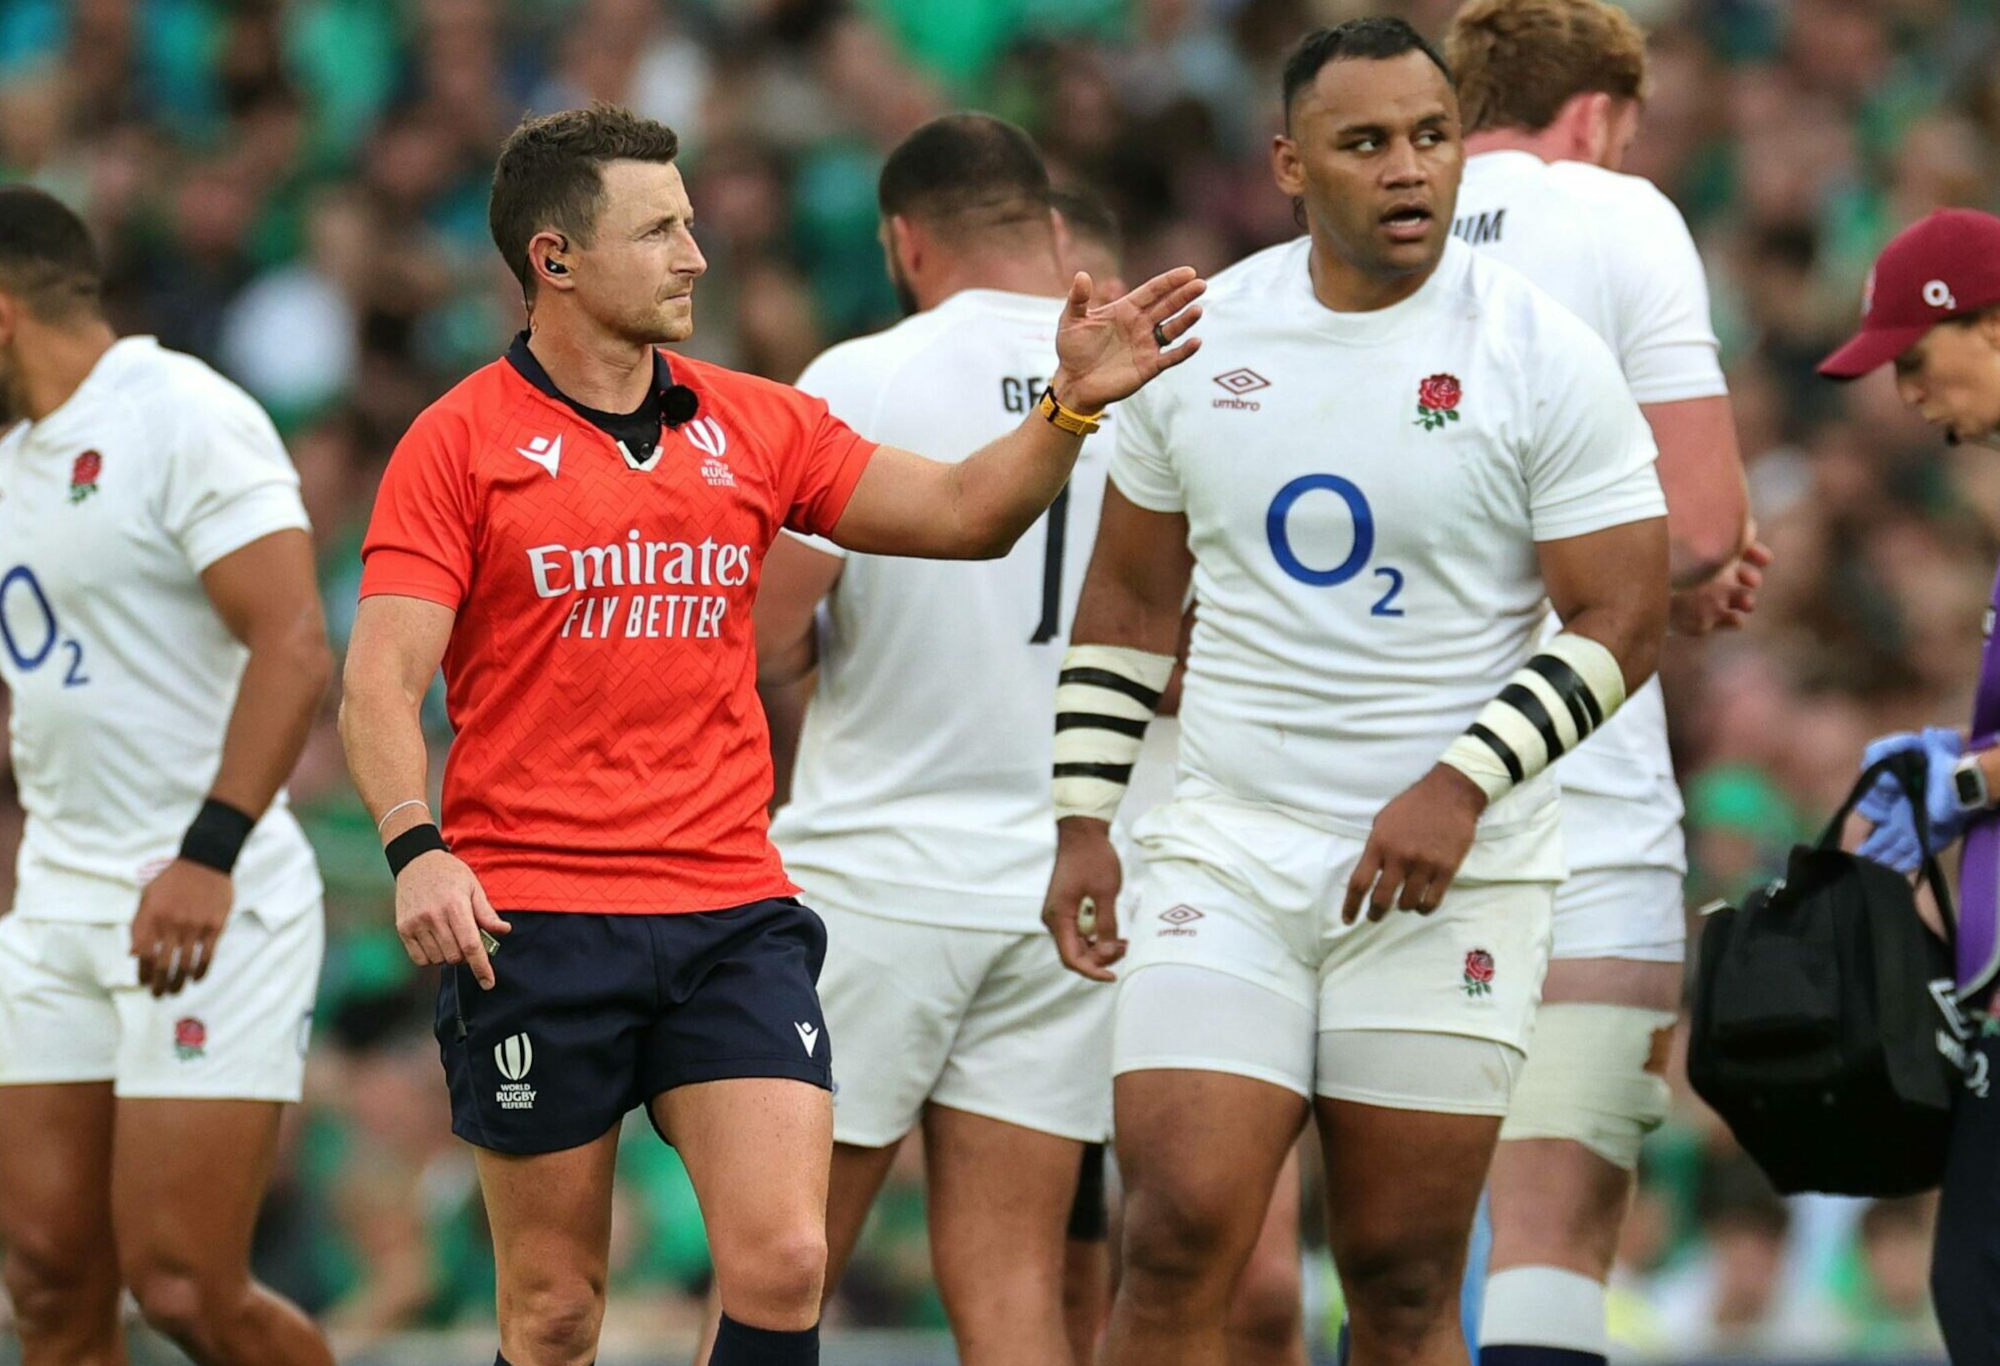 Billy Vunipola looks on before being shown a yellow card.